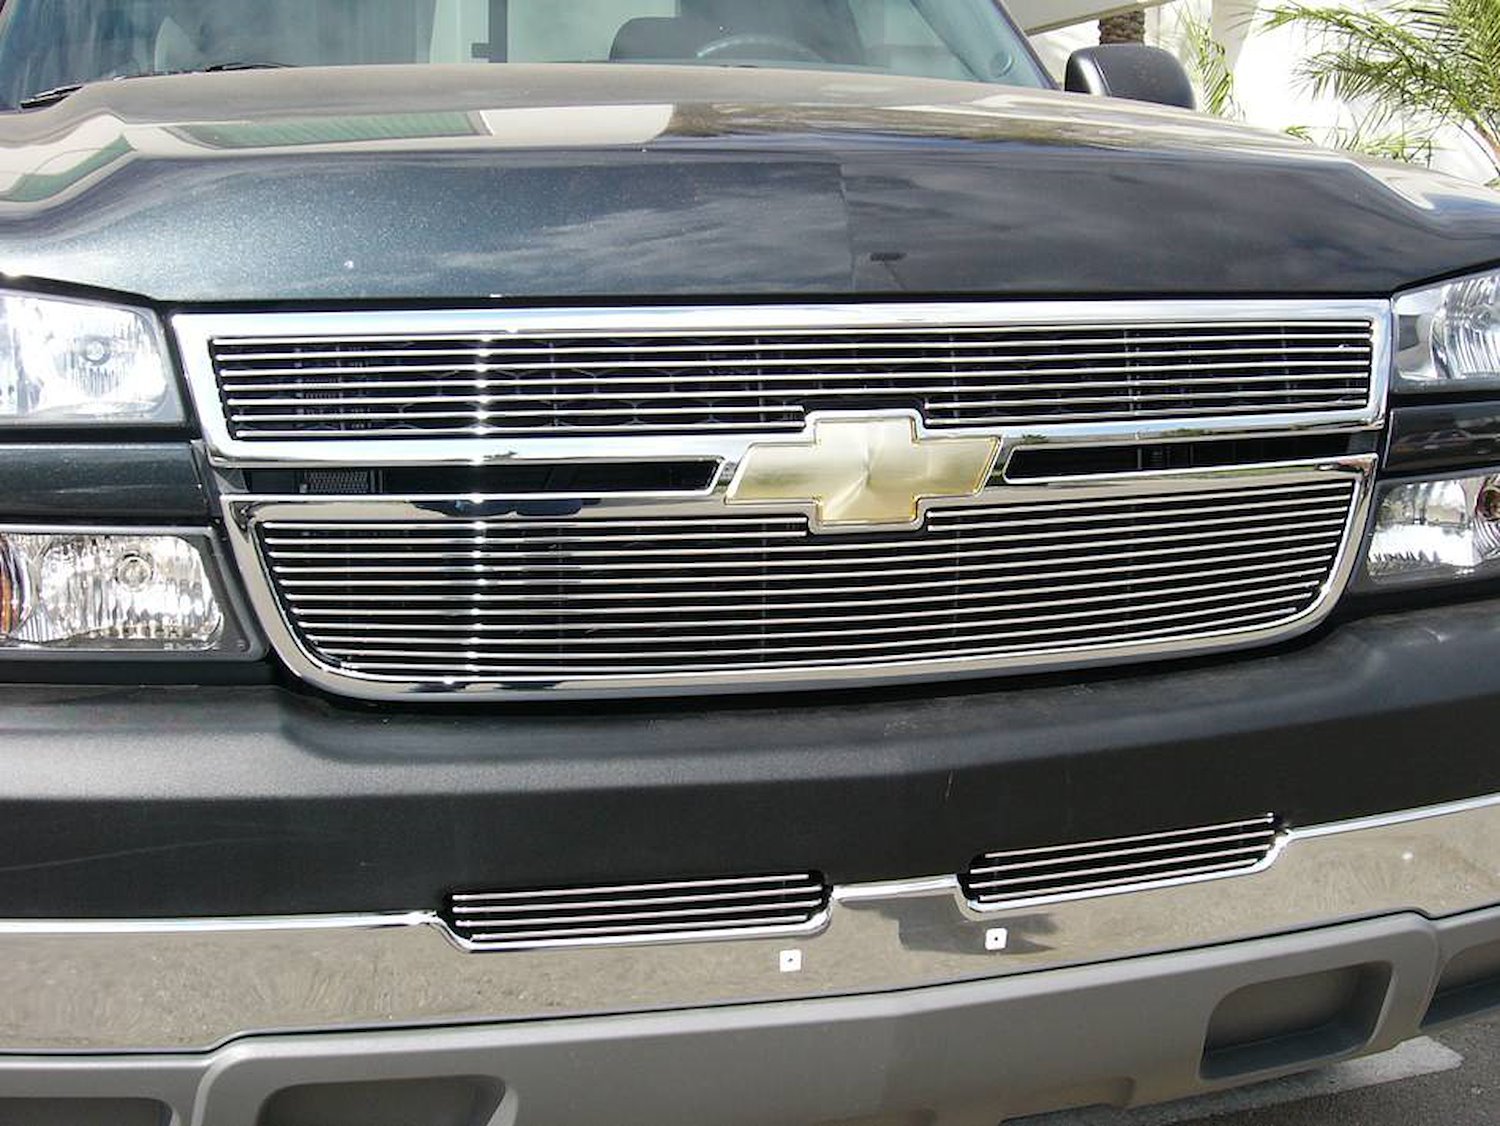 Billet Grille Overlay And Insert 2006 Silverado Pickup